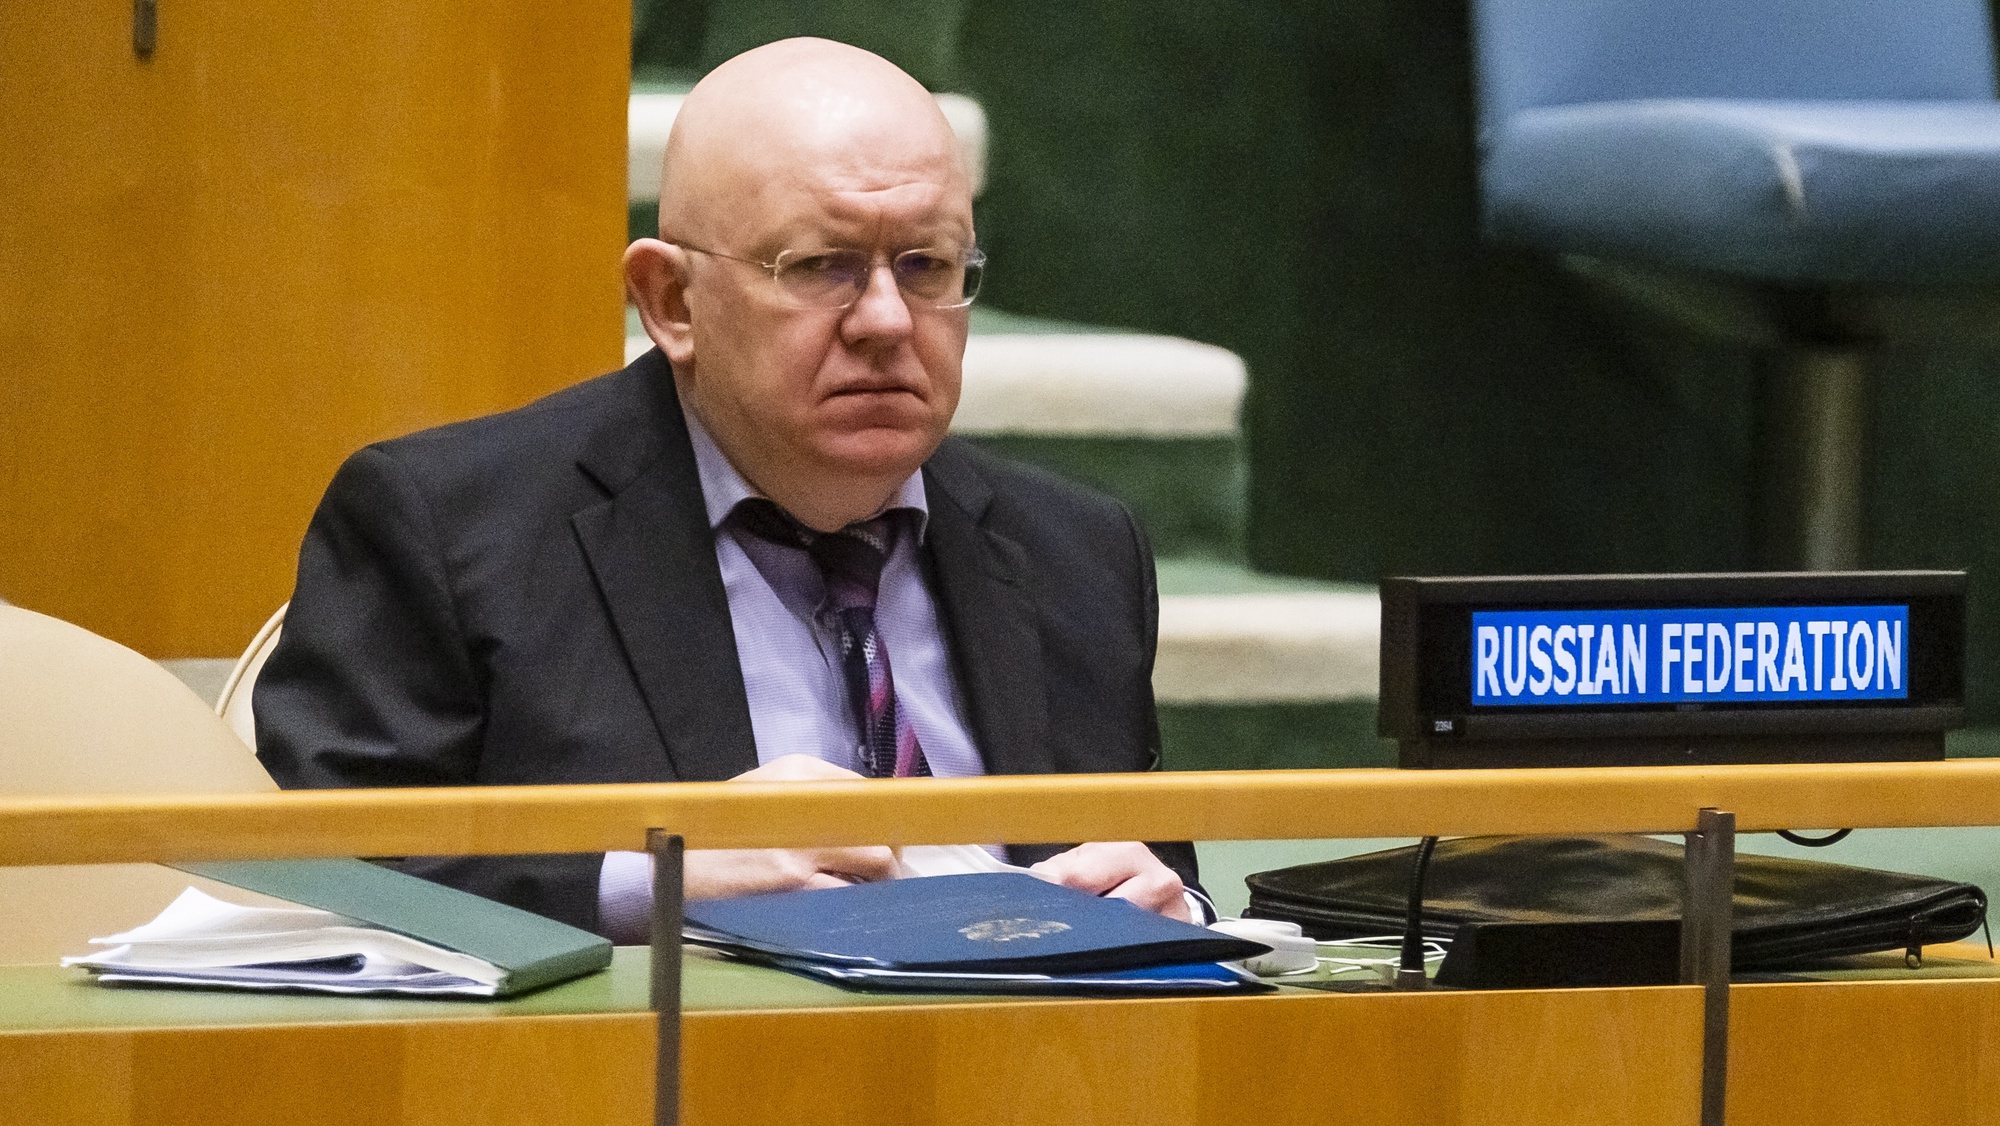 epa09846500 Russia&#039;s Ambassador to the UN, Vassily Nebenzia, during a United Nations General Assembly meeting where member countries are scheduled to debate and vote on resolutions denouncing the humanitarian crisis being caused by Russia&#039;s invasion of Ukraine at United Nations headquarters in New York, New York, USA, 24 March 2022.  EPA/JUSTIN LANE